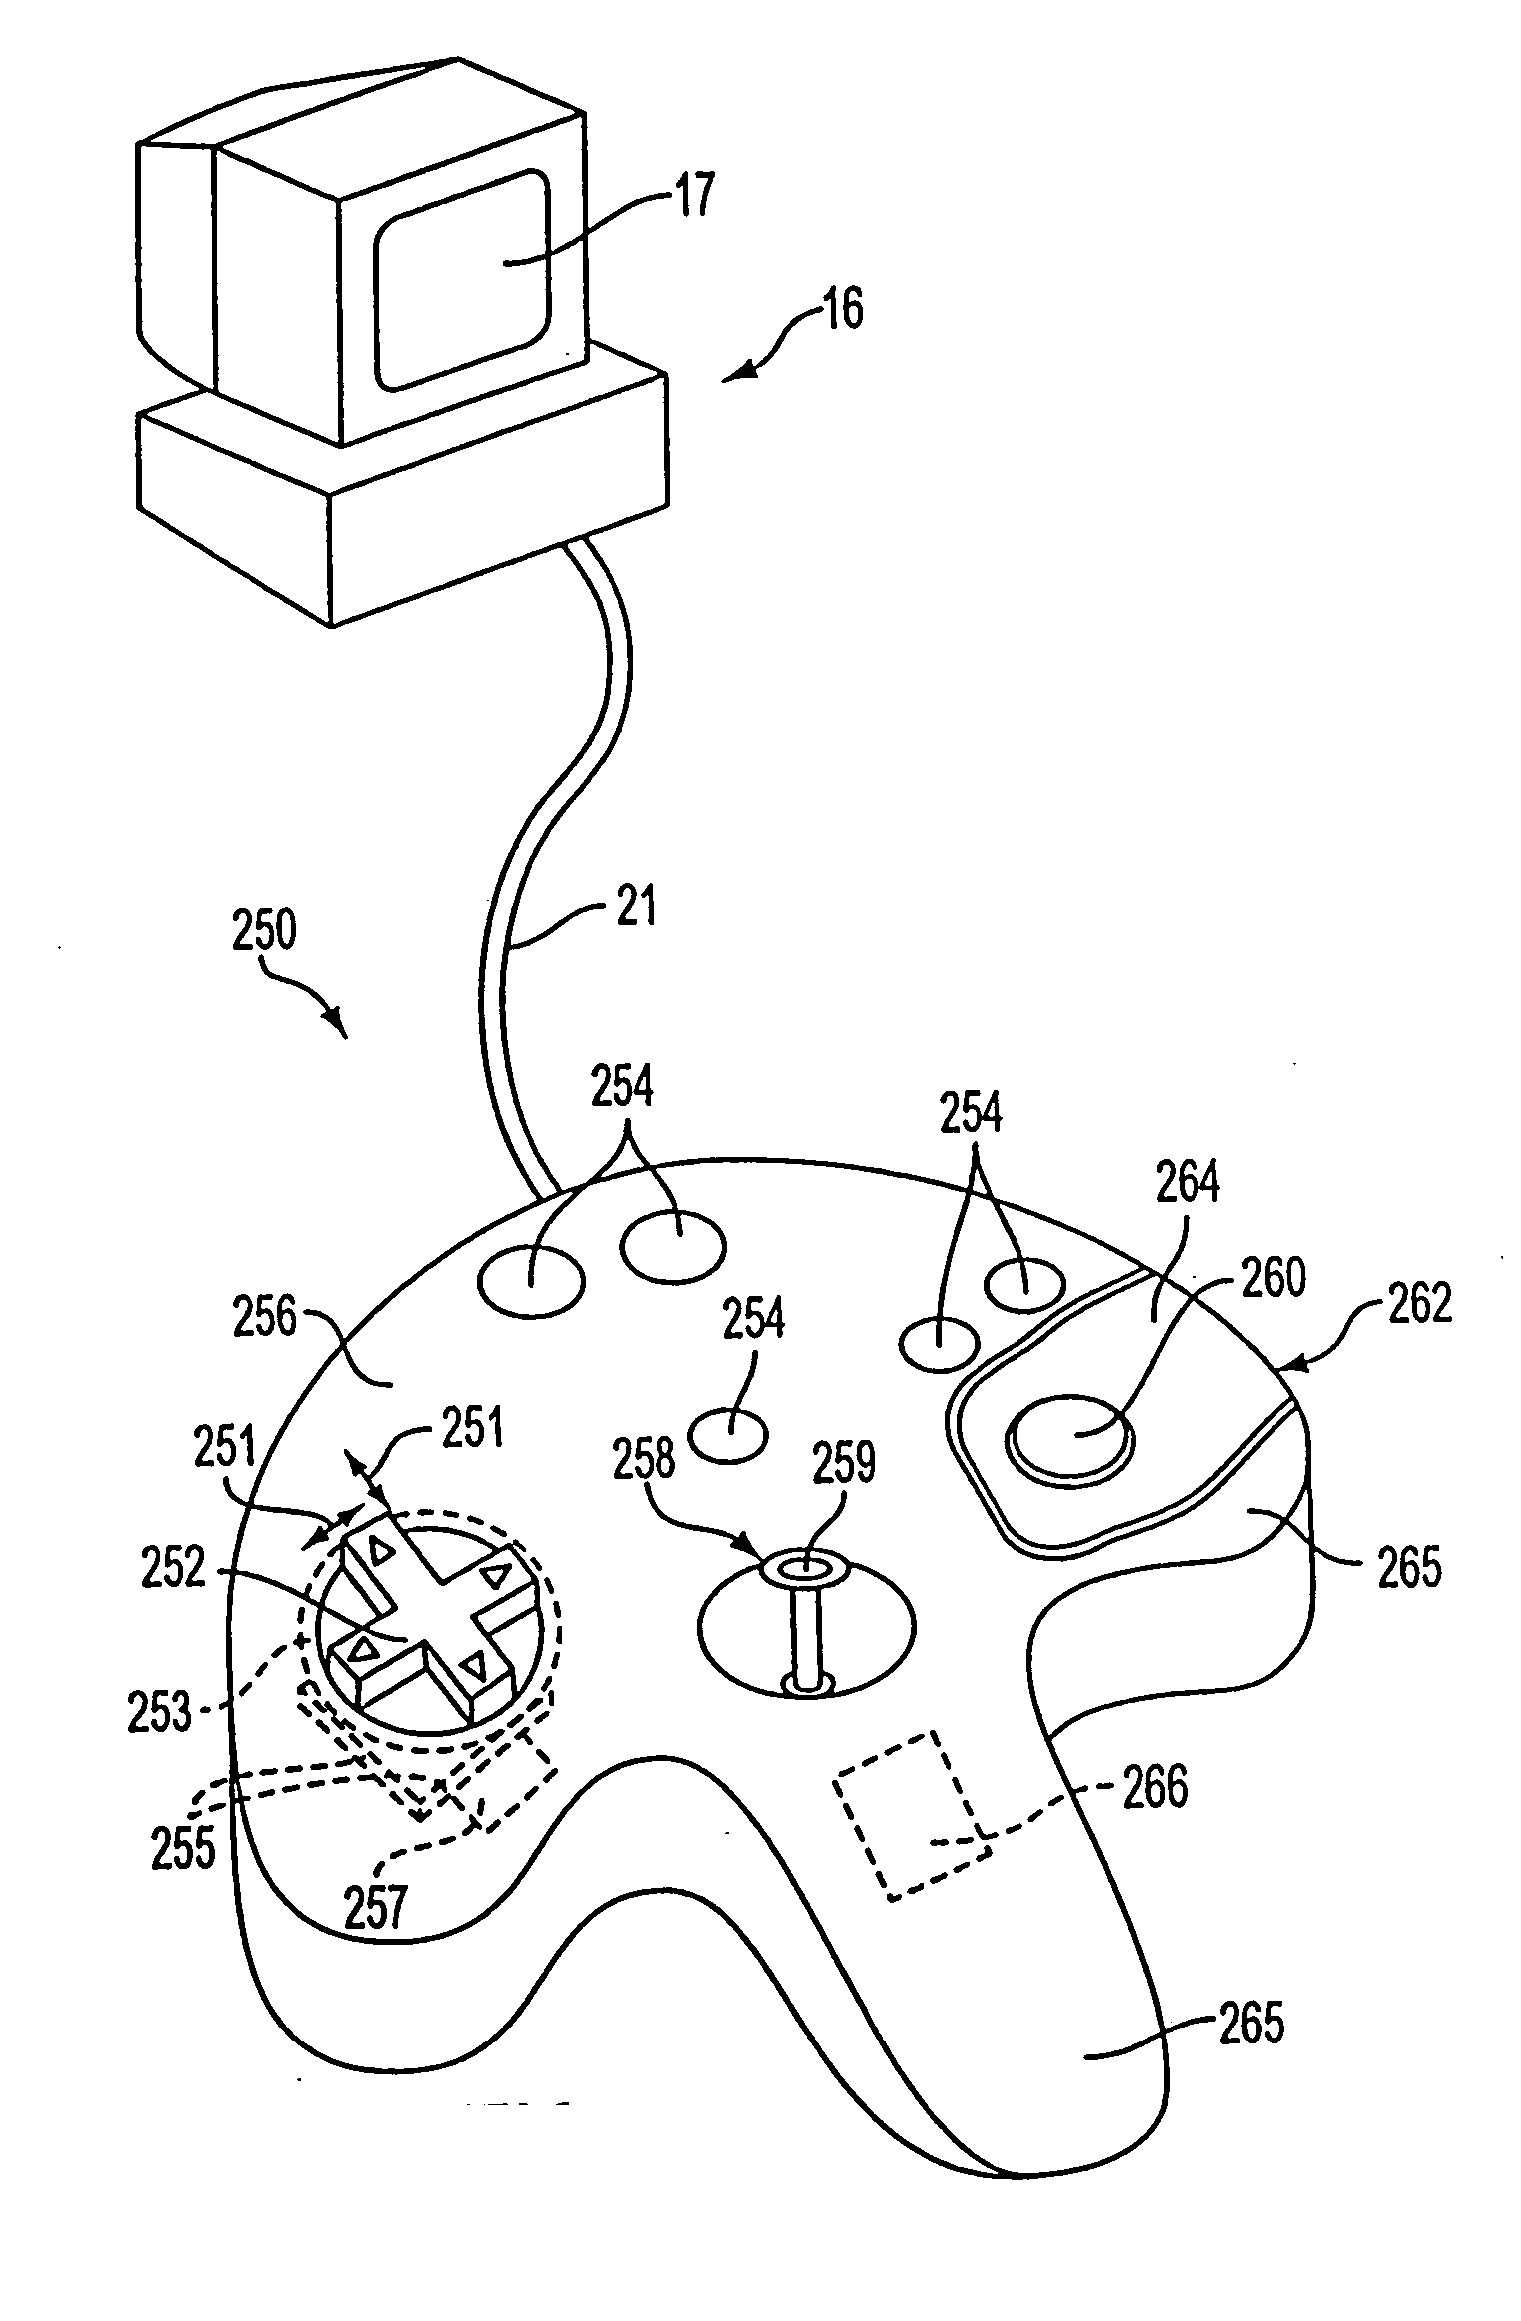 Haptic feedback device with button forces